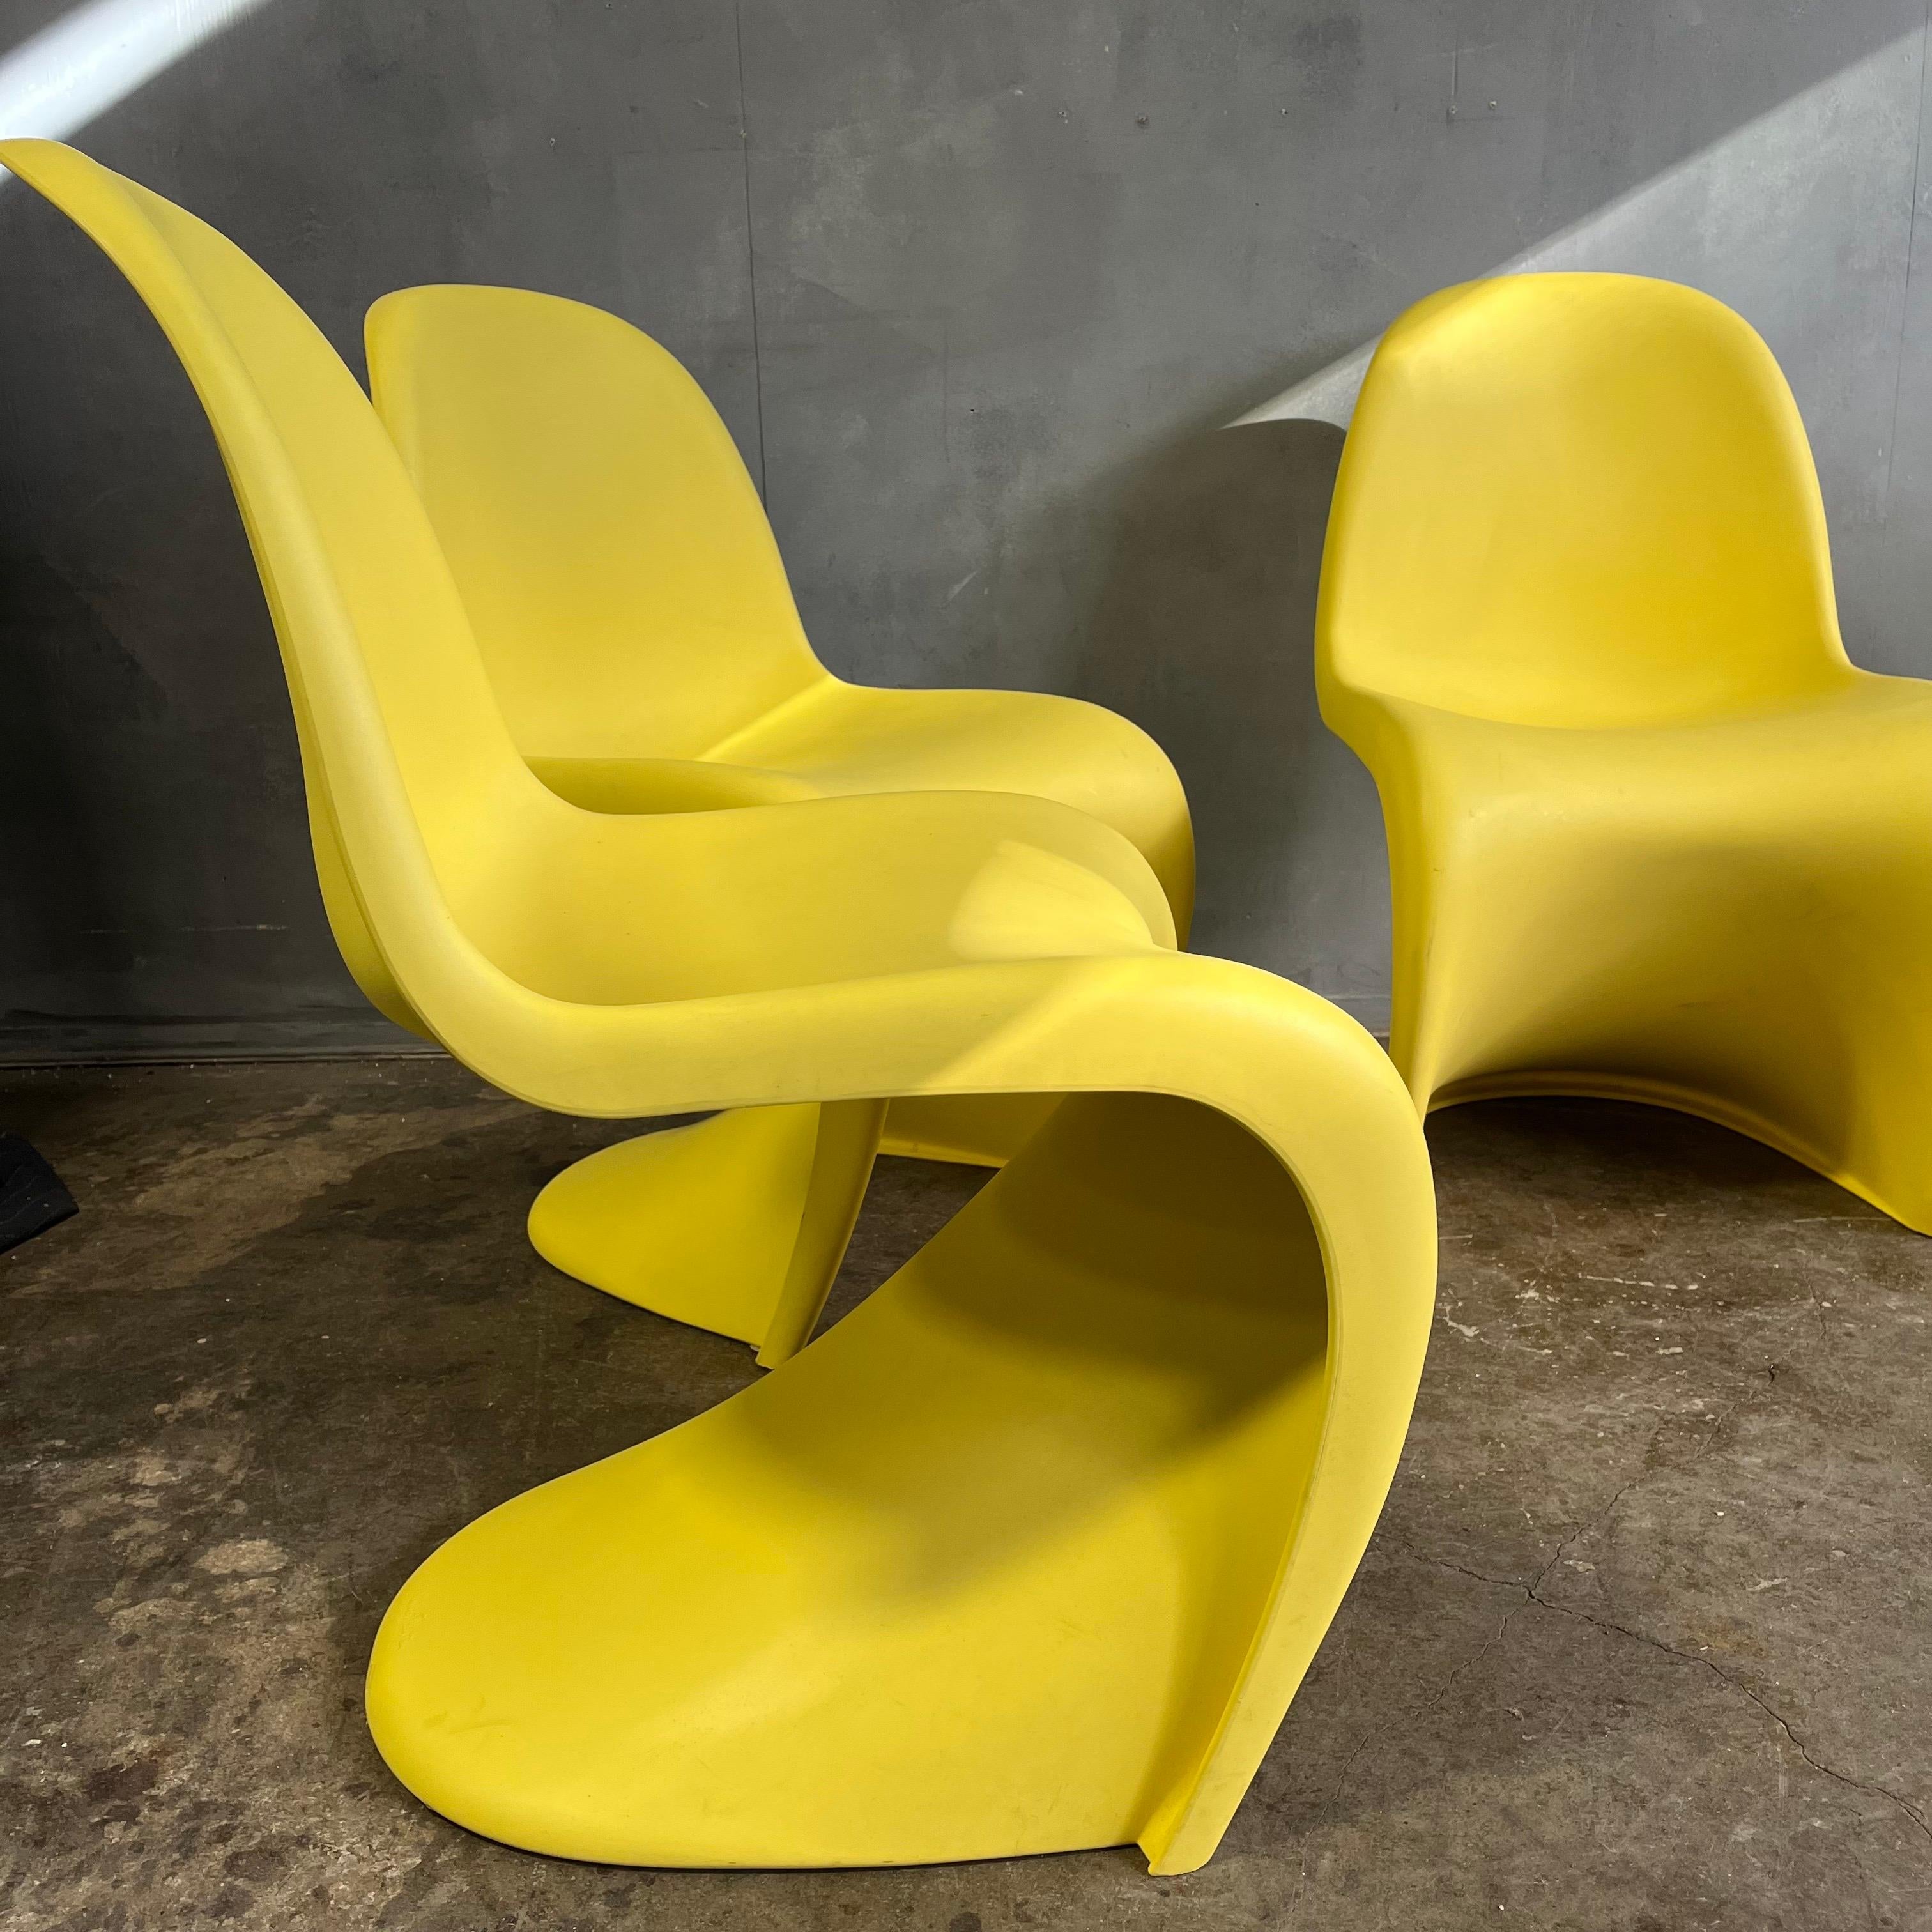 Iconic chairs designed by Verner Panton for Vitra in rare yellow. In wonderful condition showing very little wear. The Panton chair is constructed from a single mold of plastic in a matte finish. Vitra treated these chairs with a special additive to